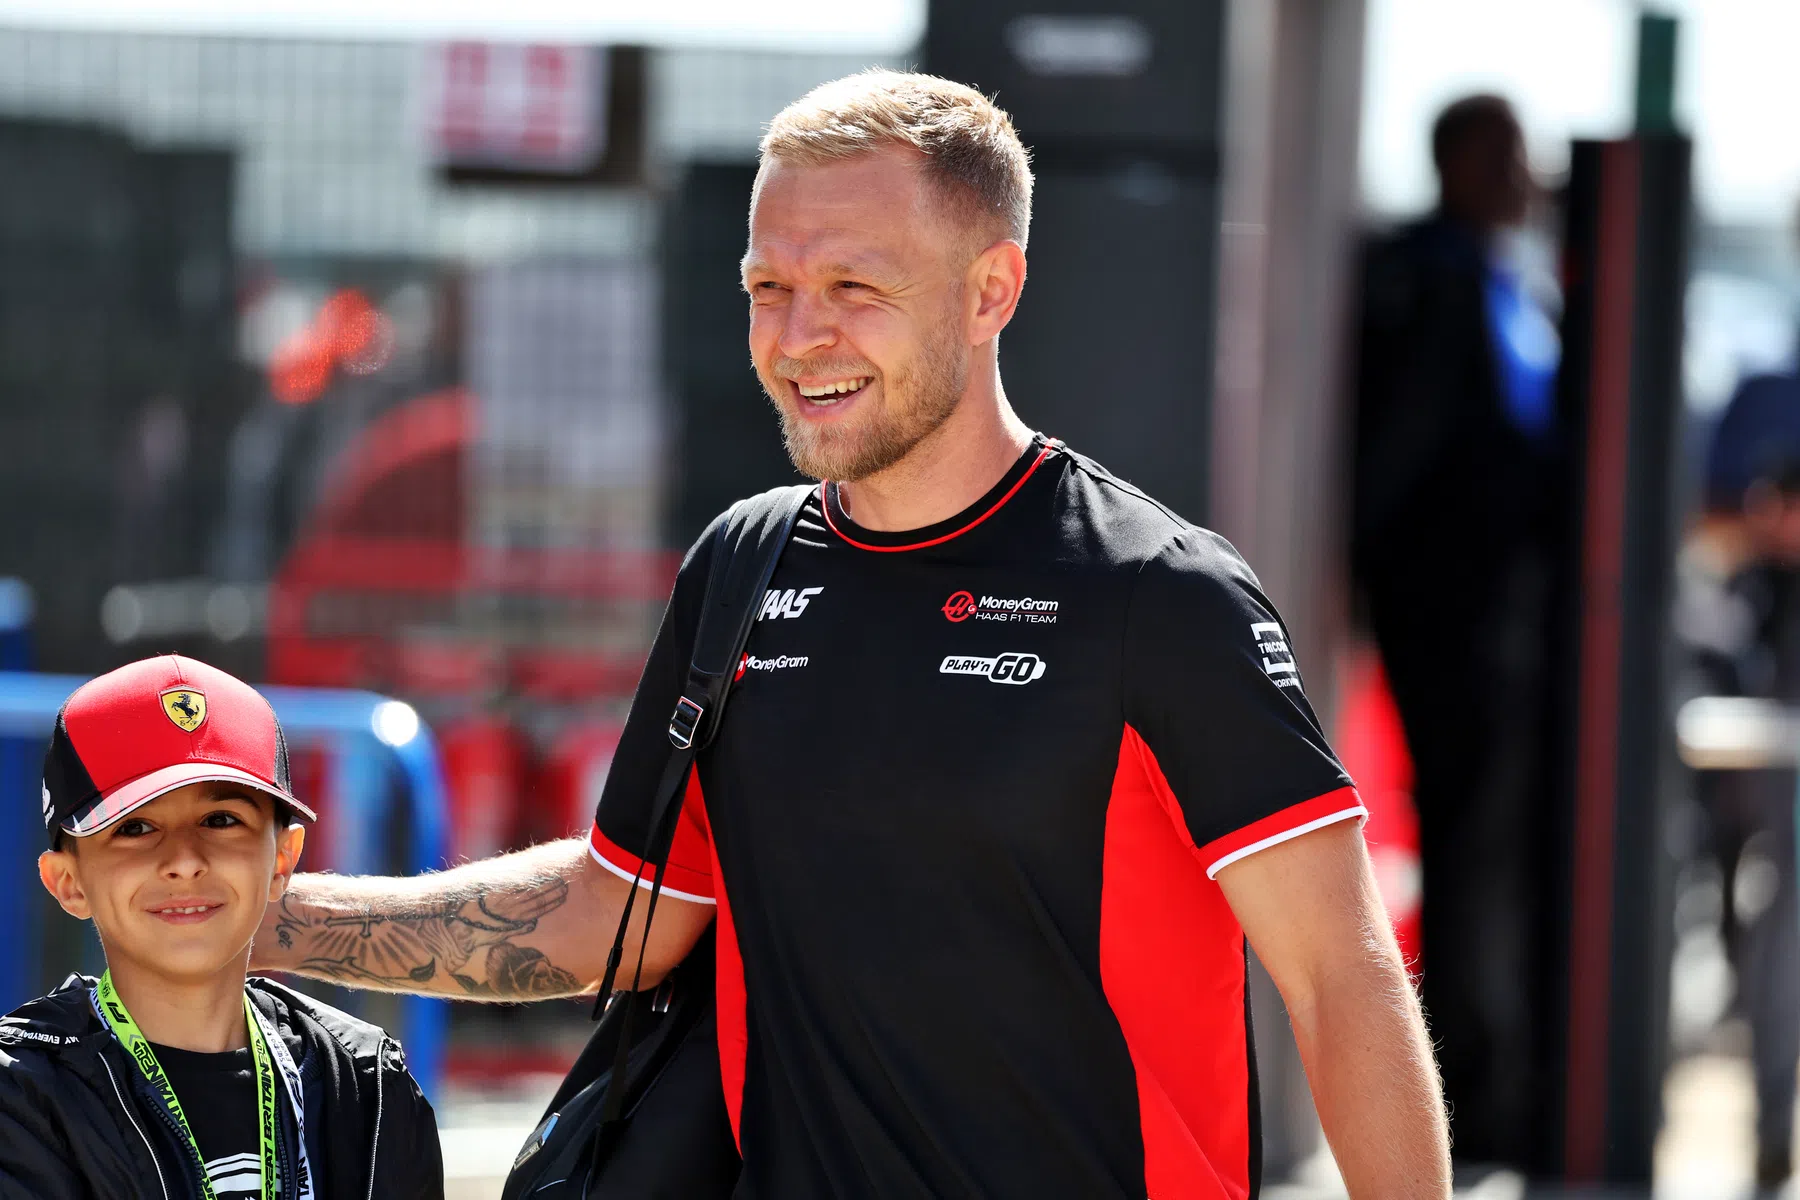 magnussen appeals to fia after Norris incident and points to US